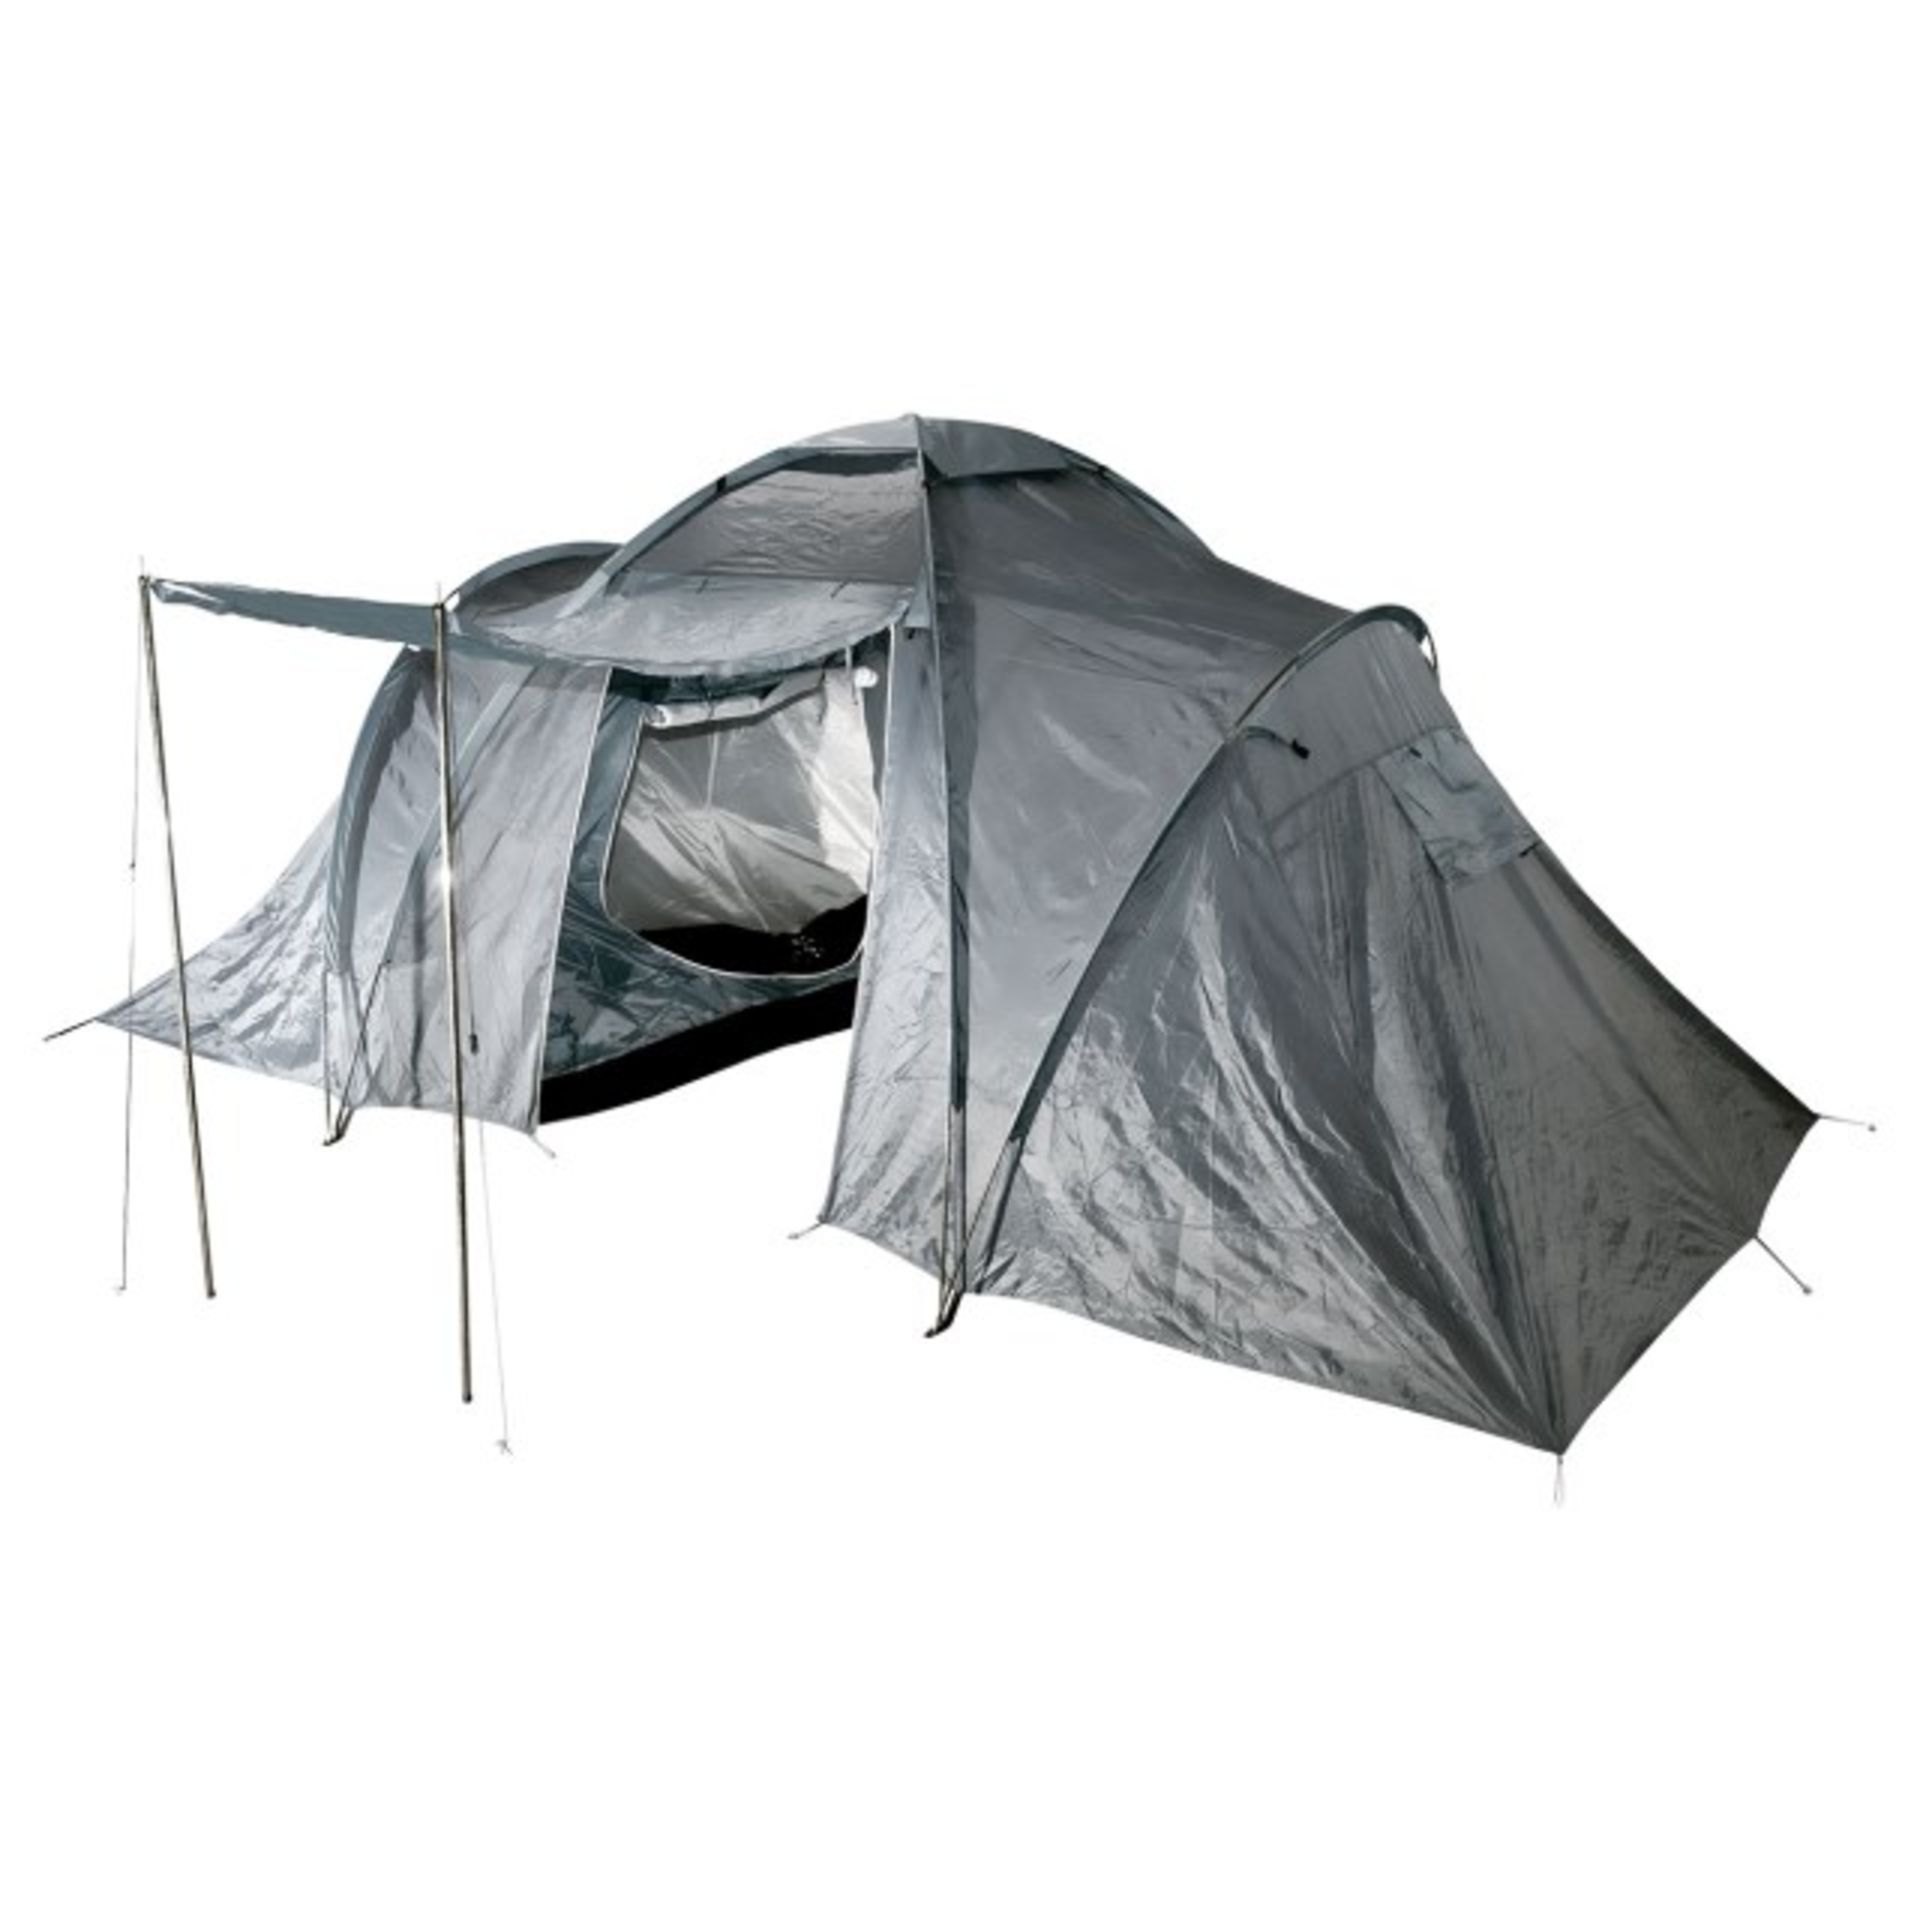 V Brand New Redcliffs Longwood Four Man Three Room Family Tent With Canopy - Colour May Vary - Image 2 of 2